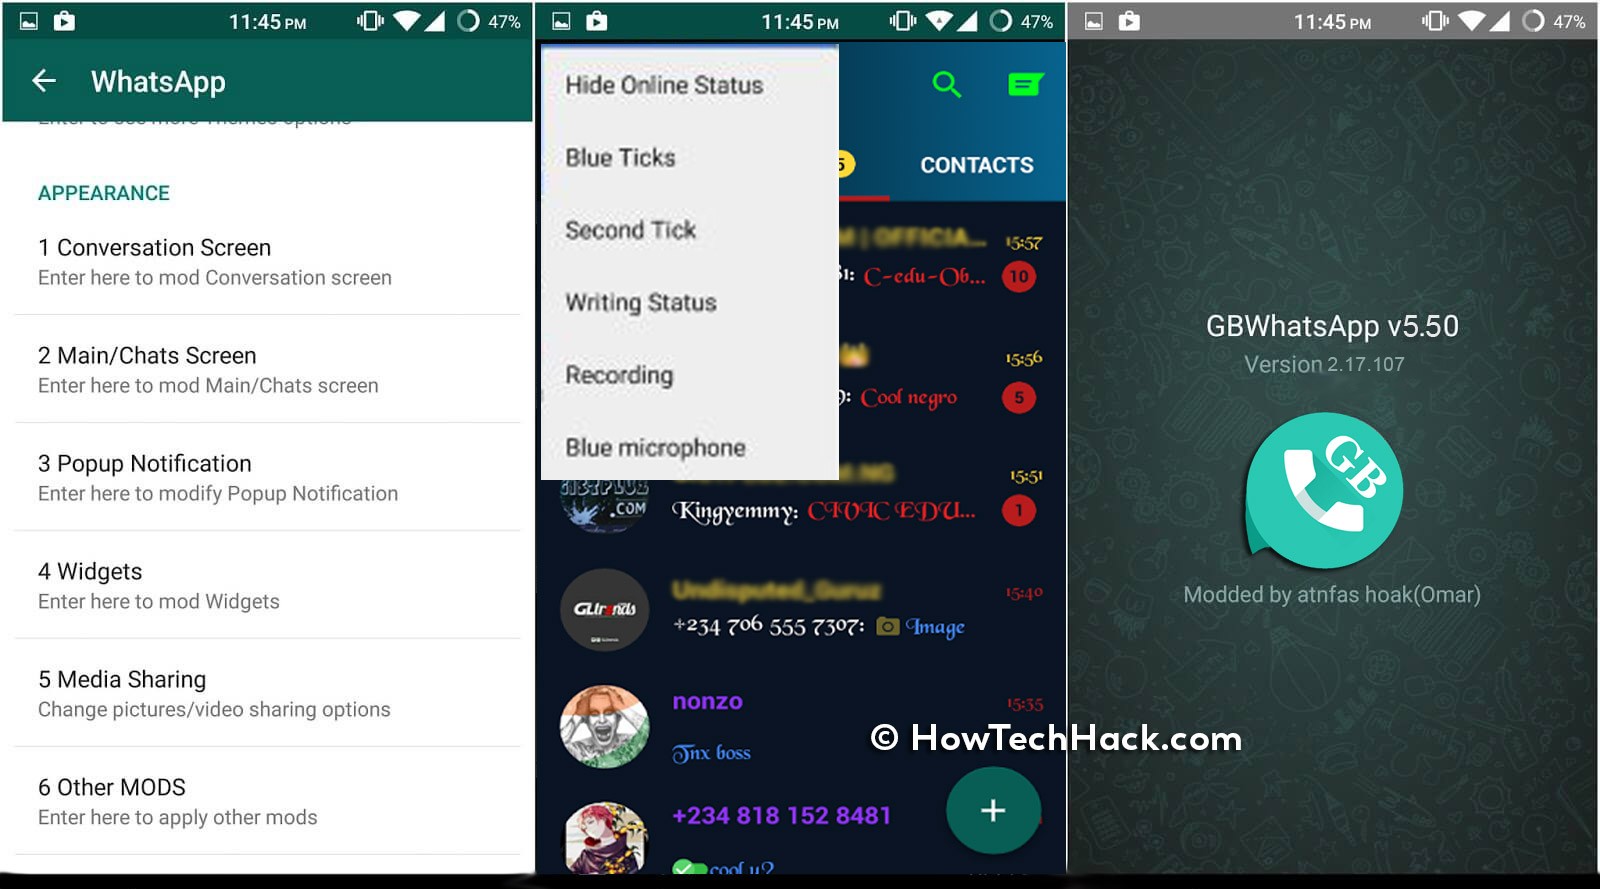 download gbwhatsapp pro on your android